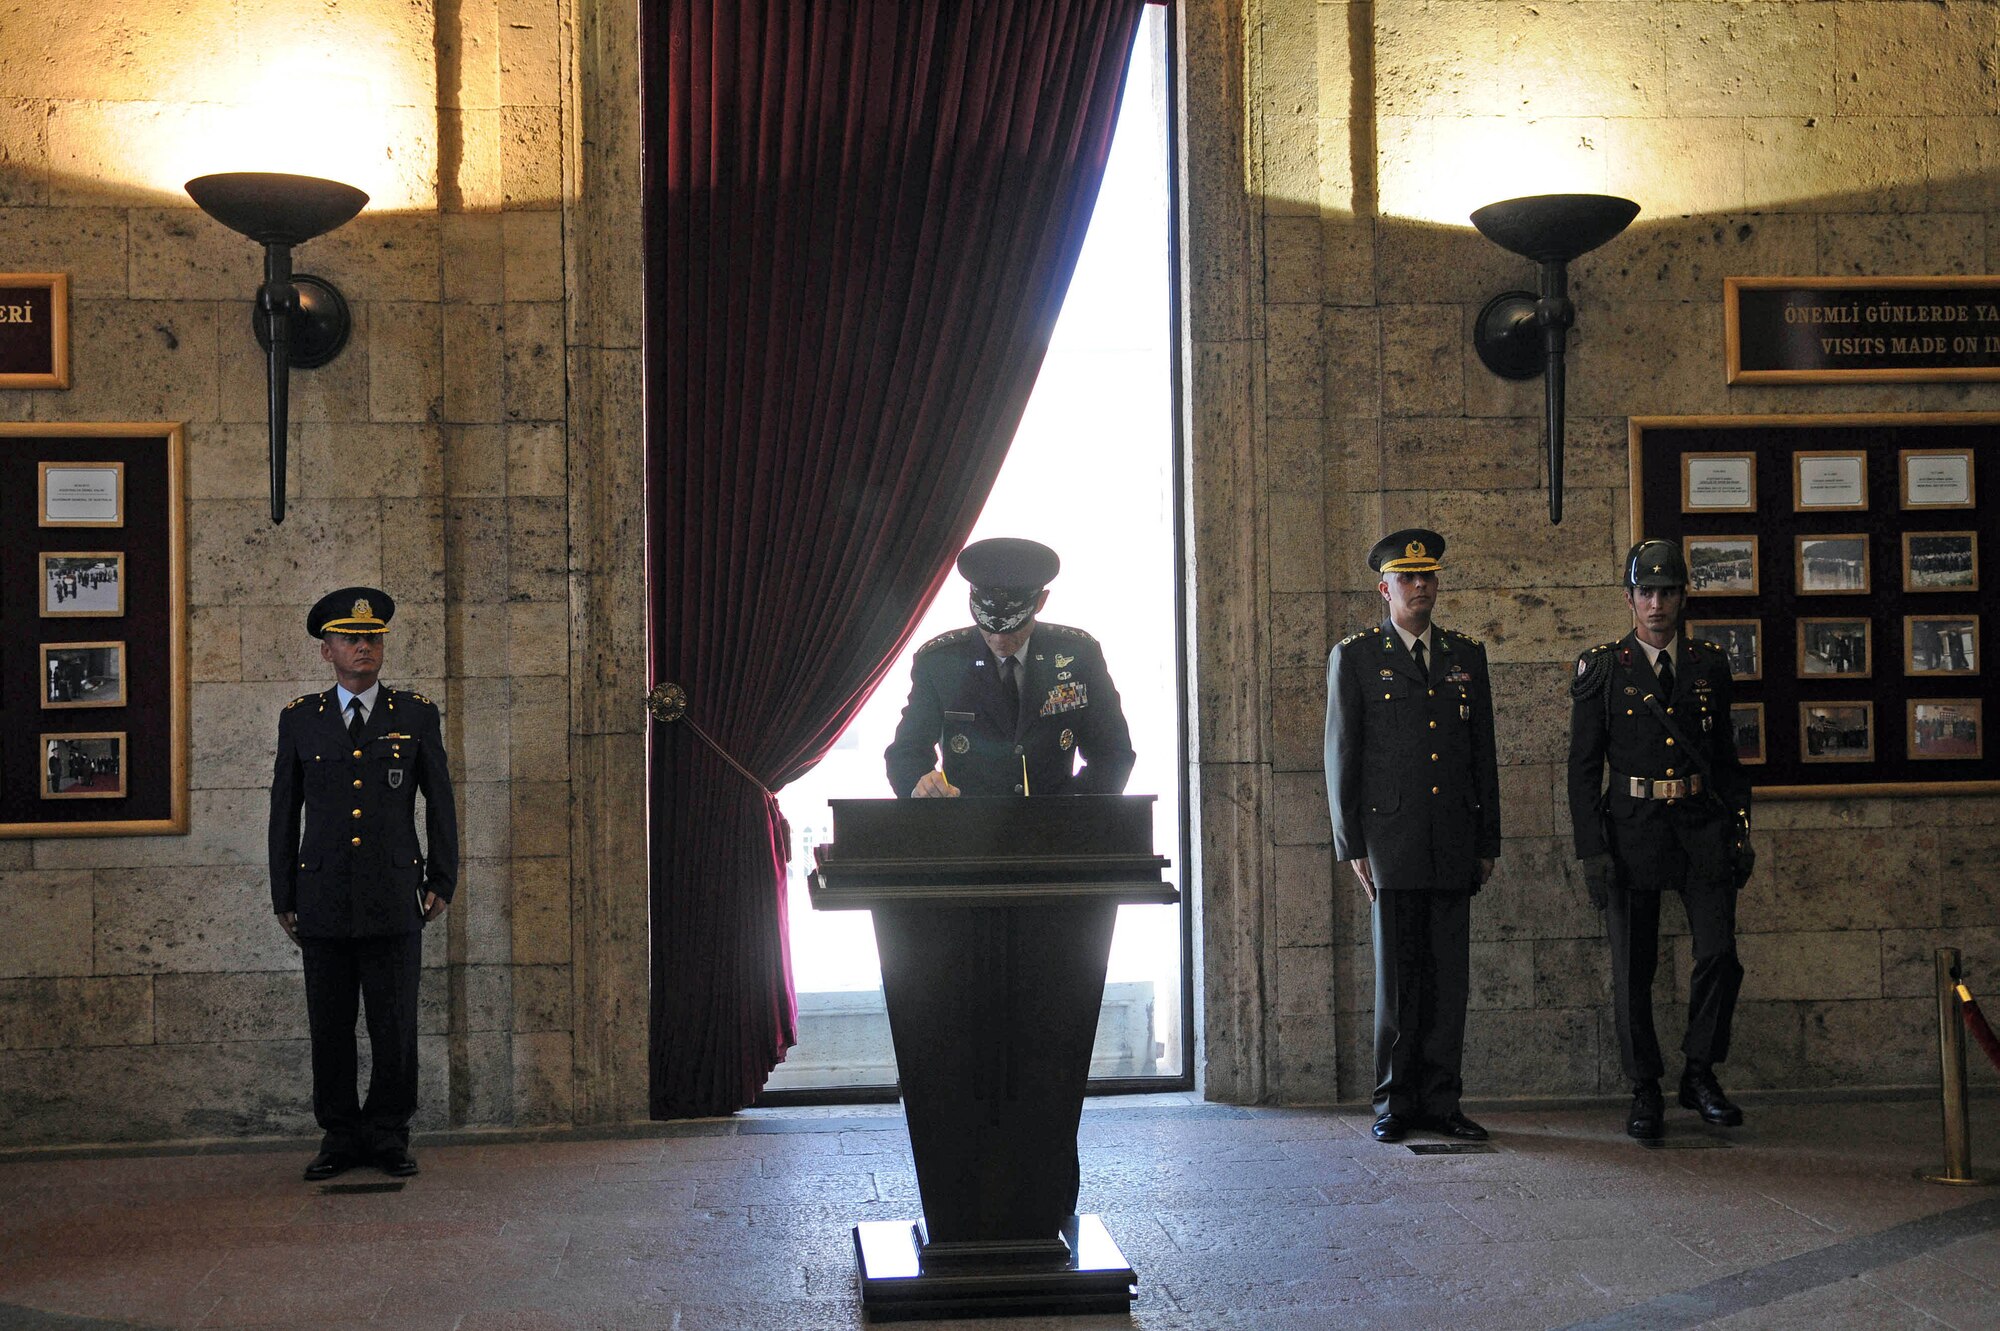 Air Force Chief of Staff Gen. Norton A. Schwartz writes a message in a visitor's log at Anitkabir, a memorial and mausoleum in Ankara, Turkey, honoring Mustafa Kemal Ataturk, the founder of the Republic of Turkey.  During the visit to the memorial July 19, 2010, General Schwartz and his wife Suzie participated in a wreath-laying ceremony along with Airmen stationed in Ankara. The ceremony was the first event during General Schwartz's multi-day visit to Turkey. (U.S. Air Force photo/Senior Airman Ashley Wood)